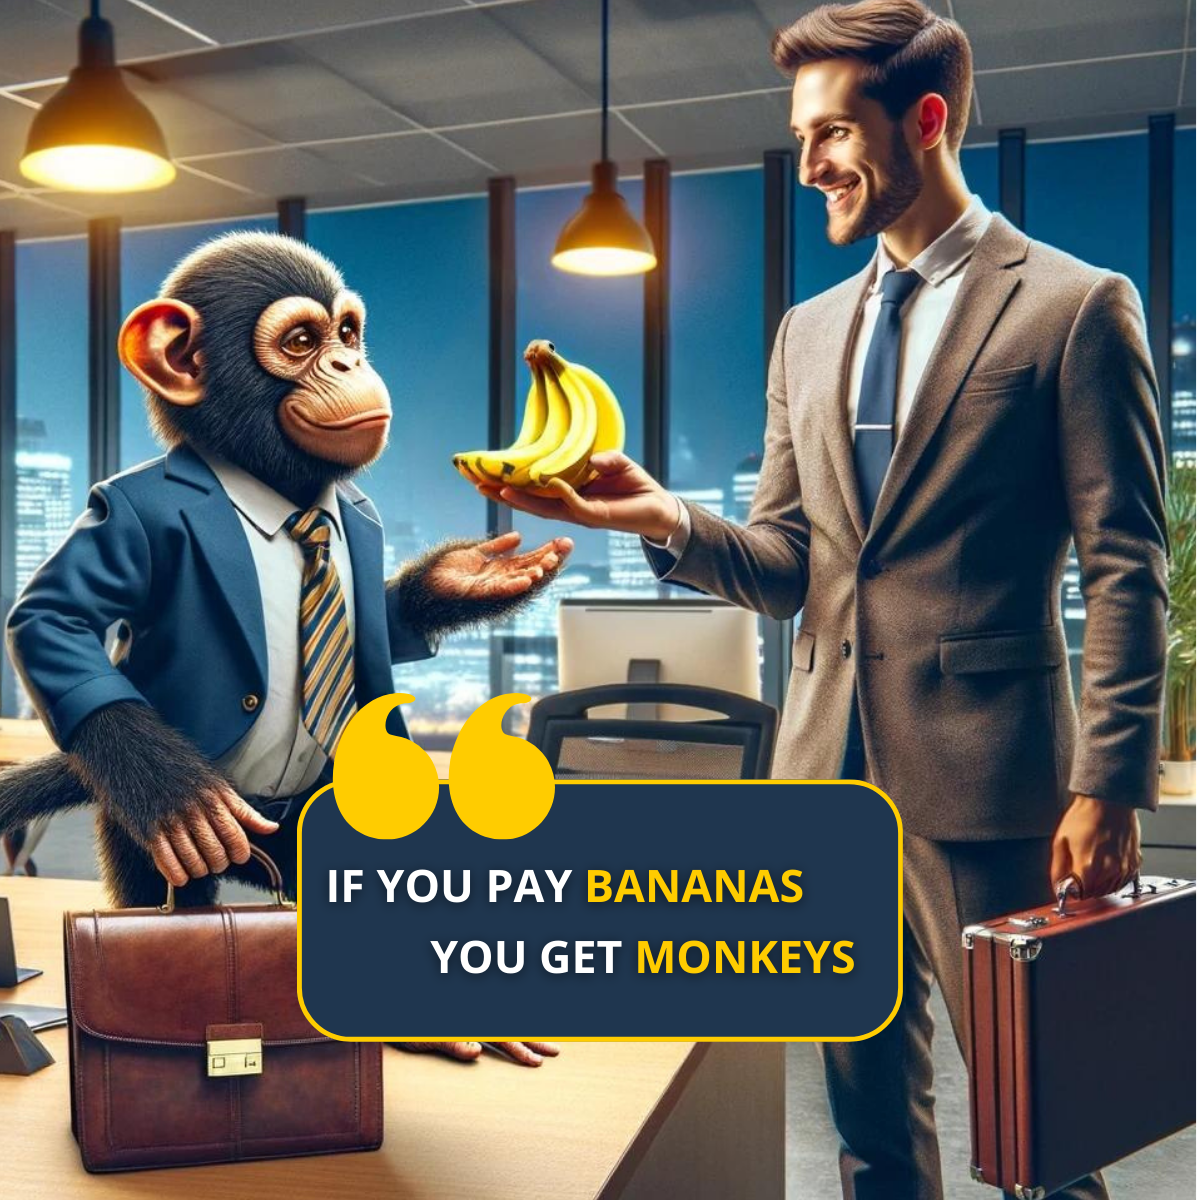 If you pay bananas you get monkeys